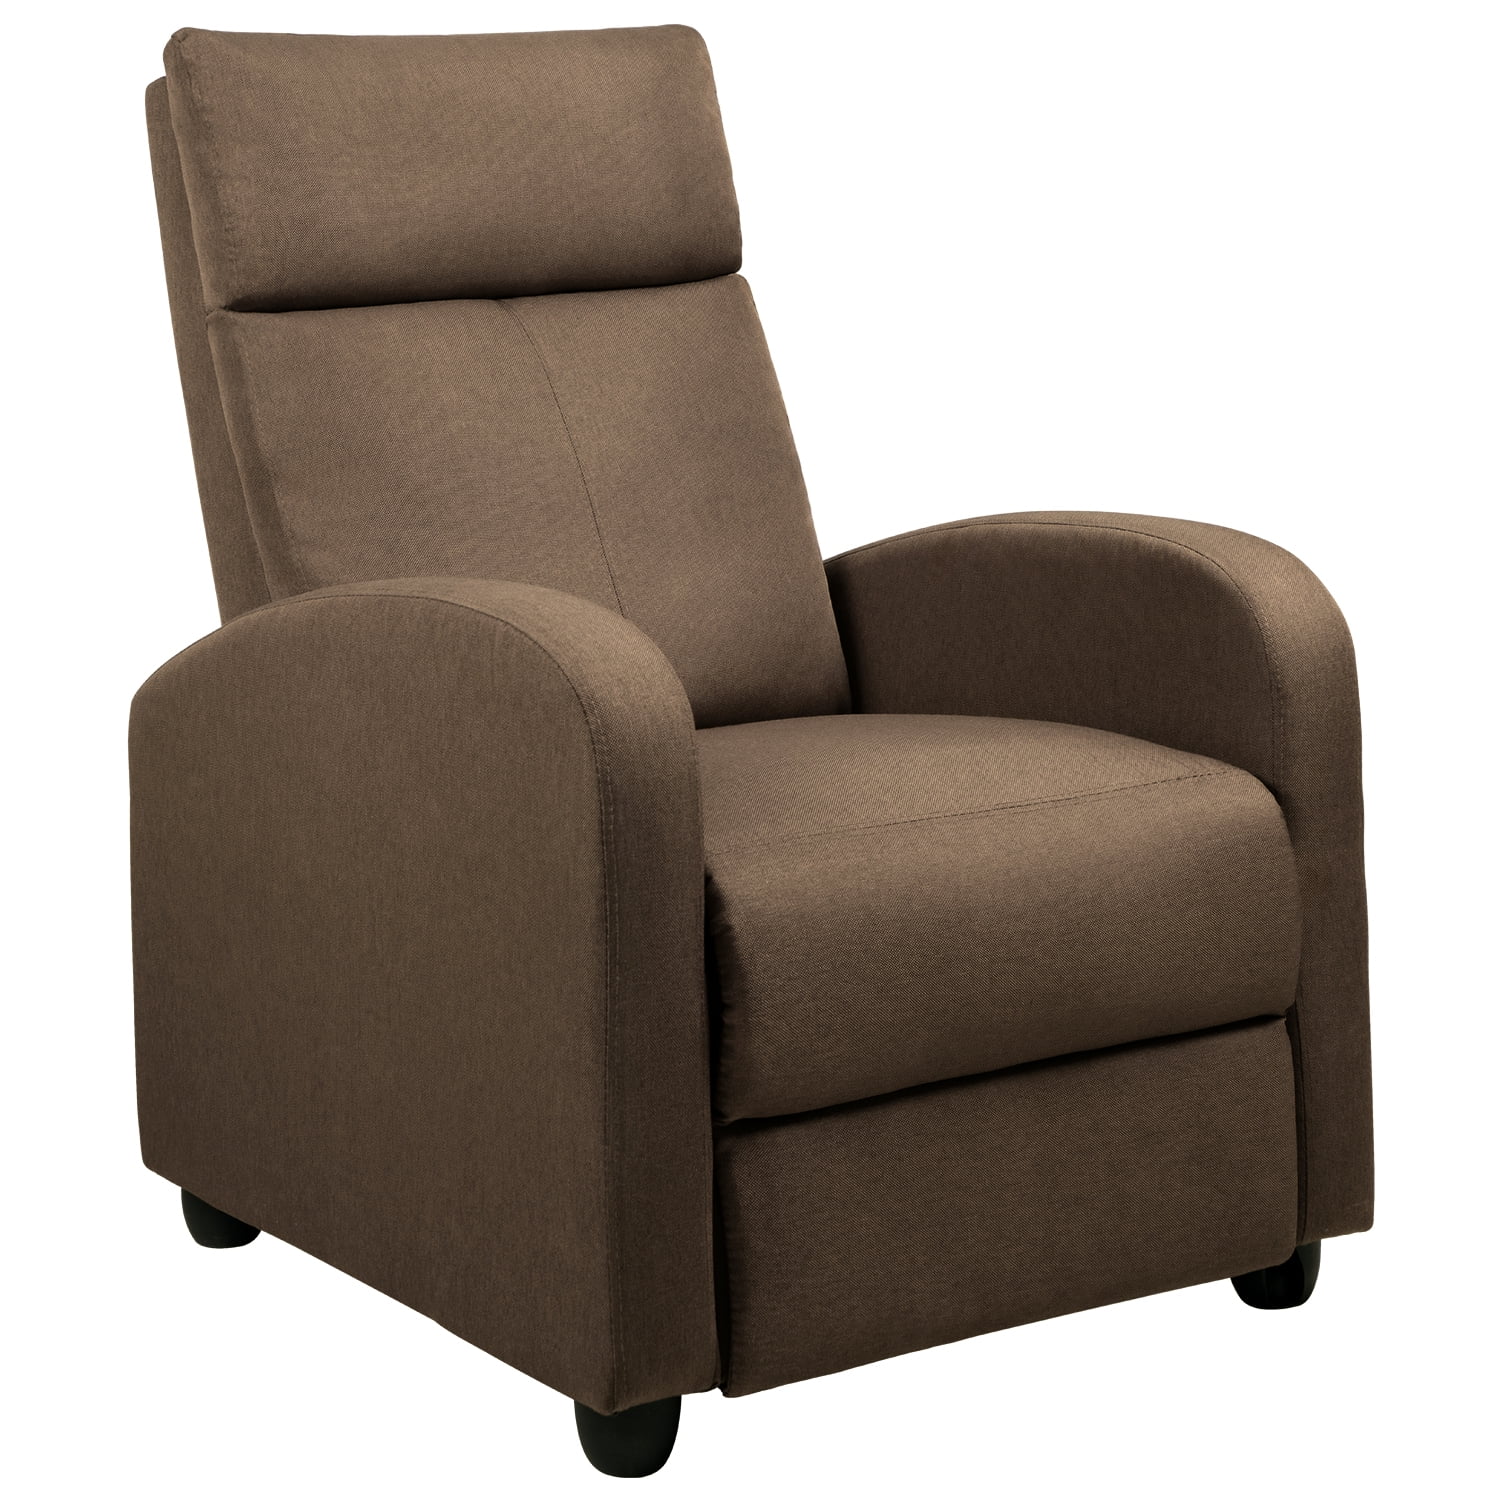 Details about   Easyfashion Soft-Cushioned Push Back Recliner Help Easy Assemble Fatigue Relieve 